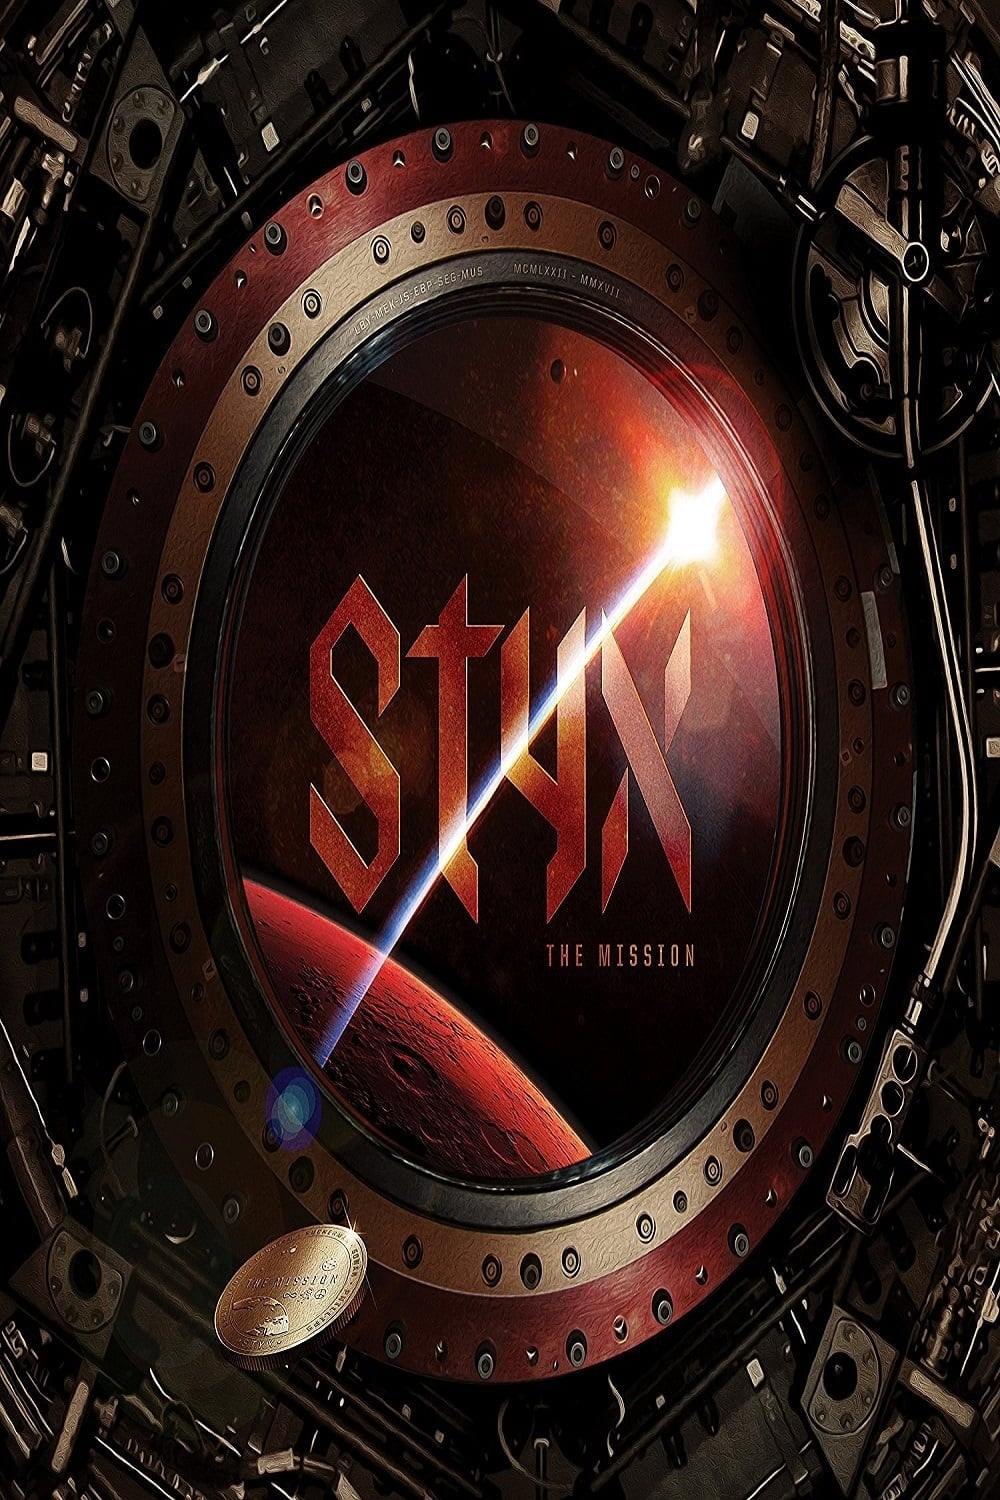 STYX: The Mission